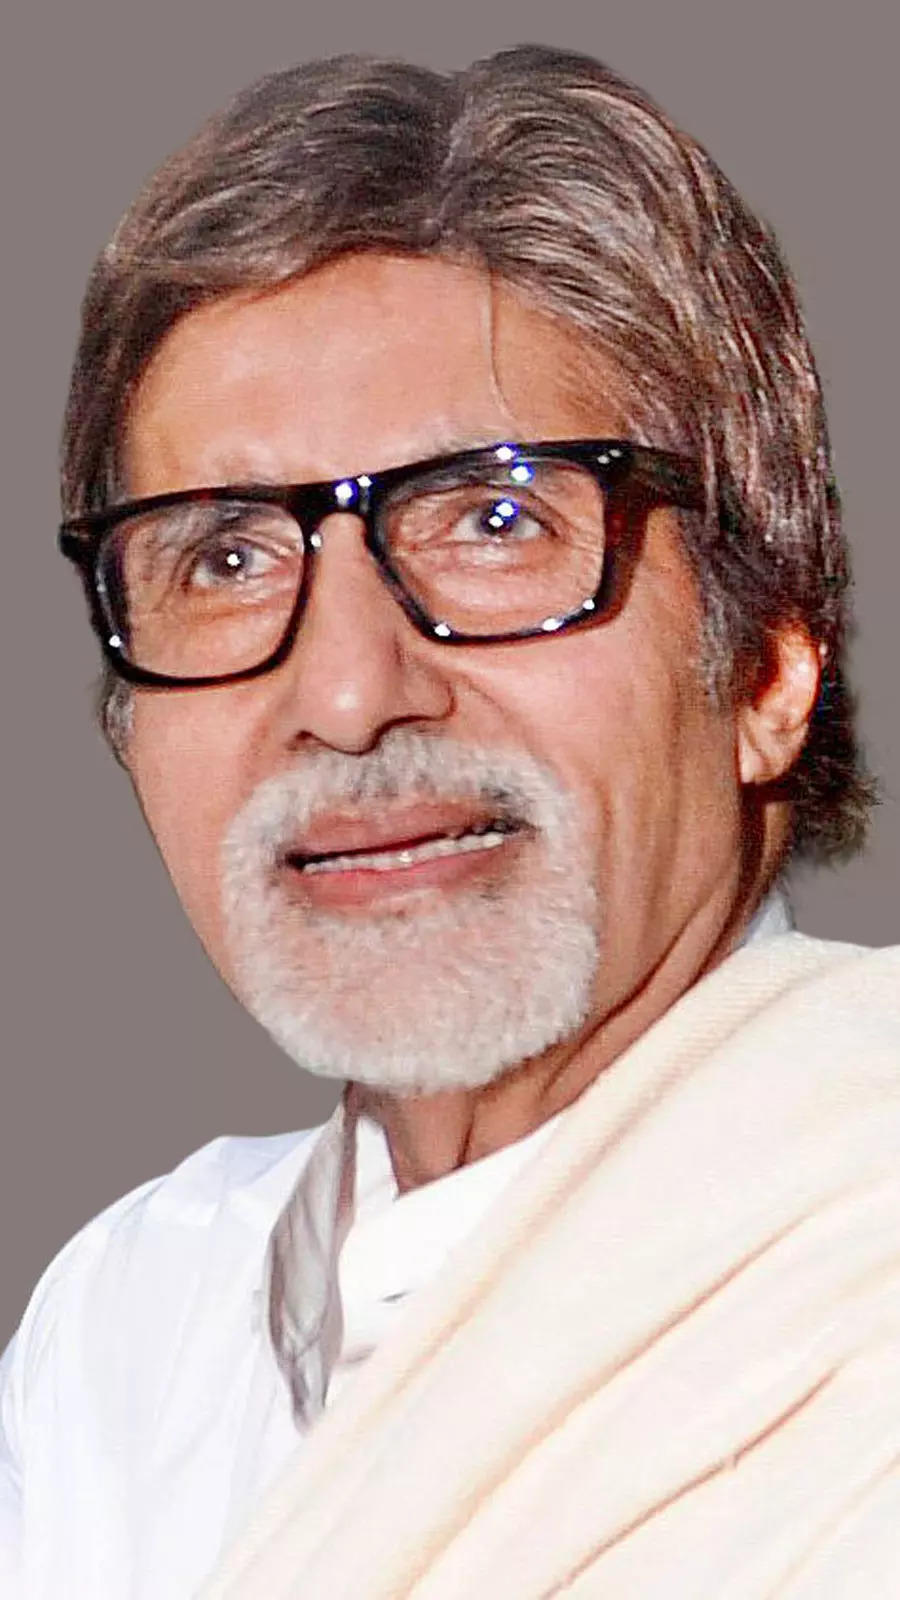 KBC 6 'comes to an end, Amitabh Bachchan expresses remorse